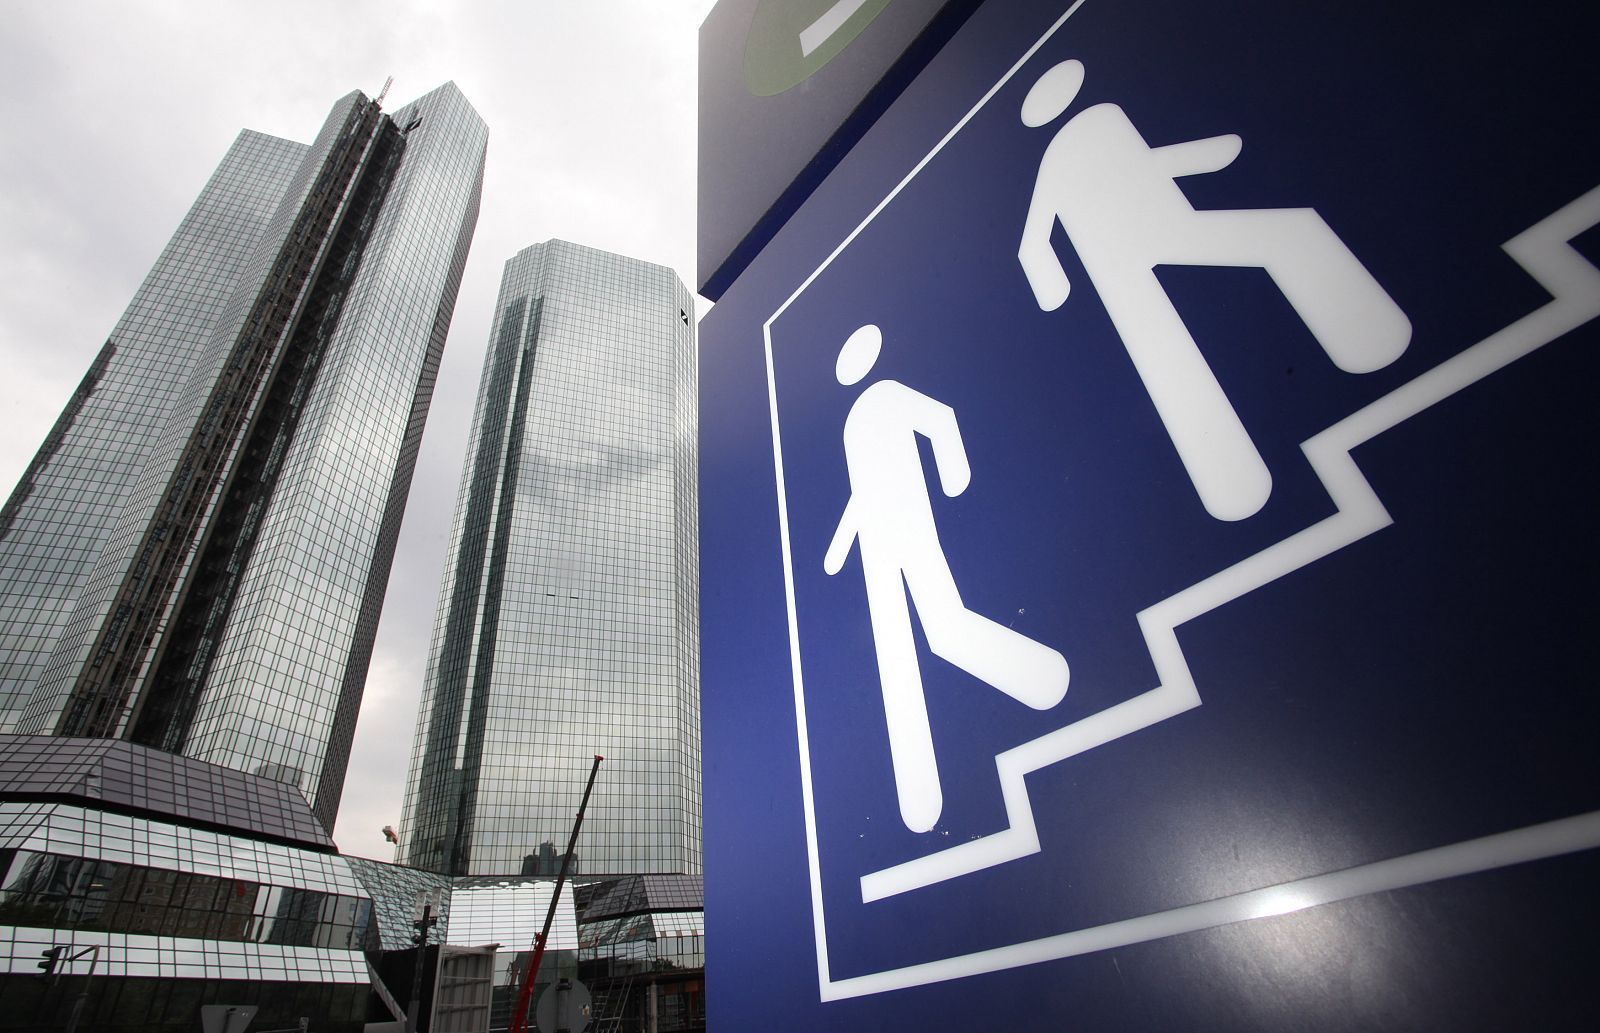 The headquarters of Deutsche Bank are pictured next to a pictograph in Frankfurt